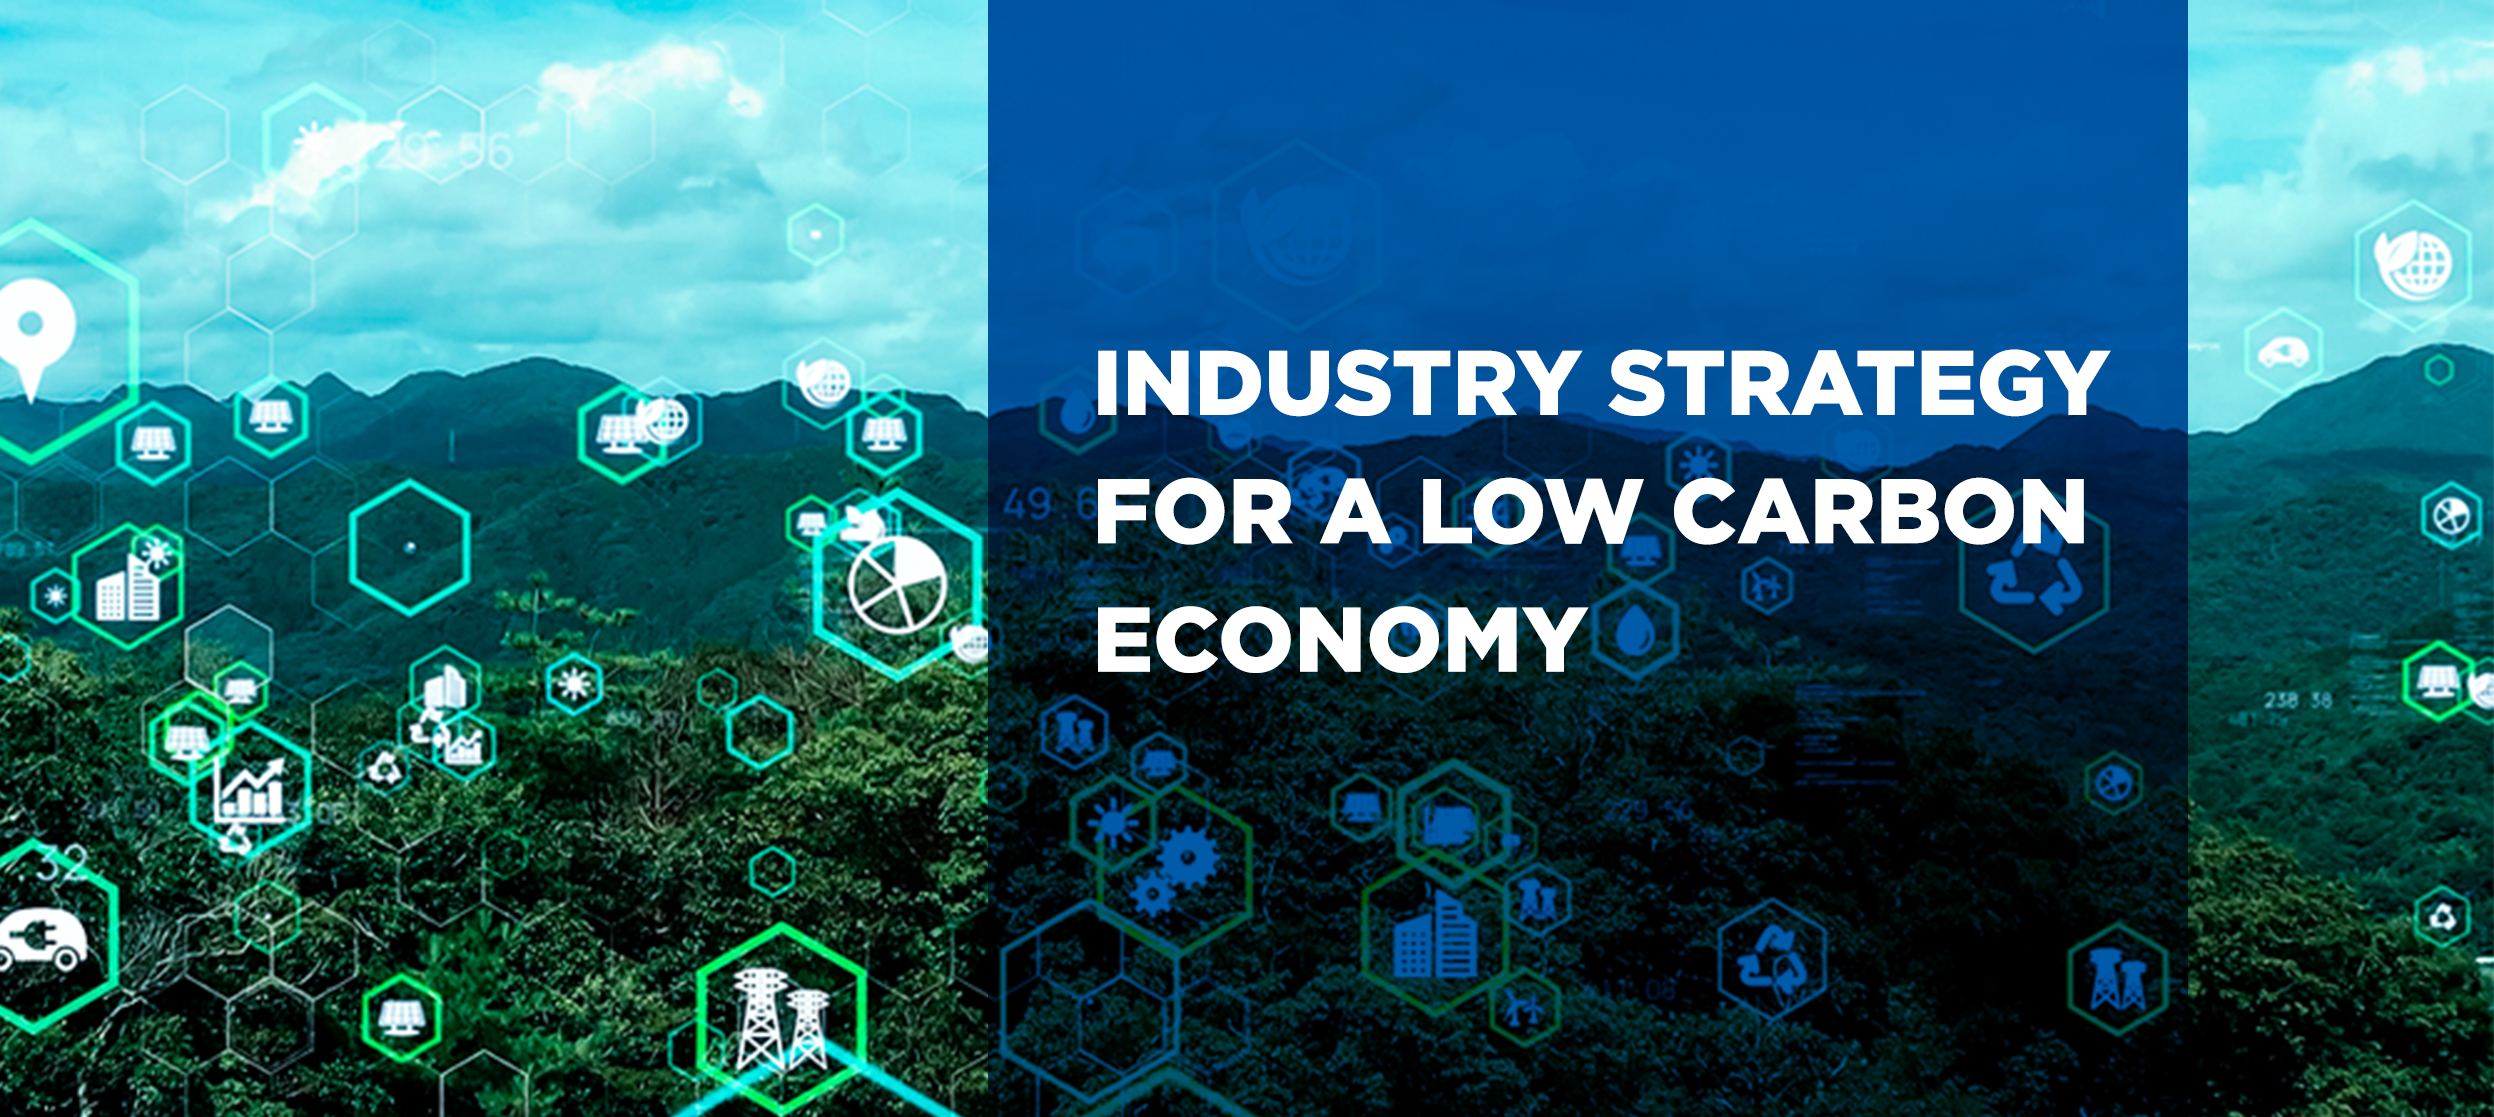 Industry Strategy For a Low Carbon Economy